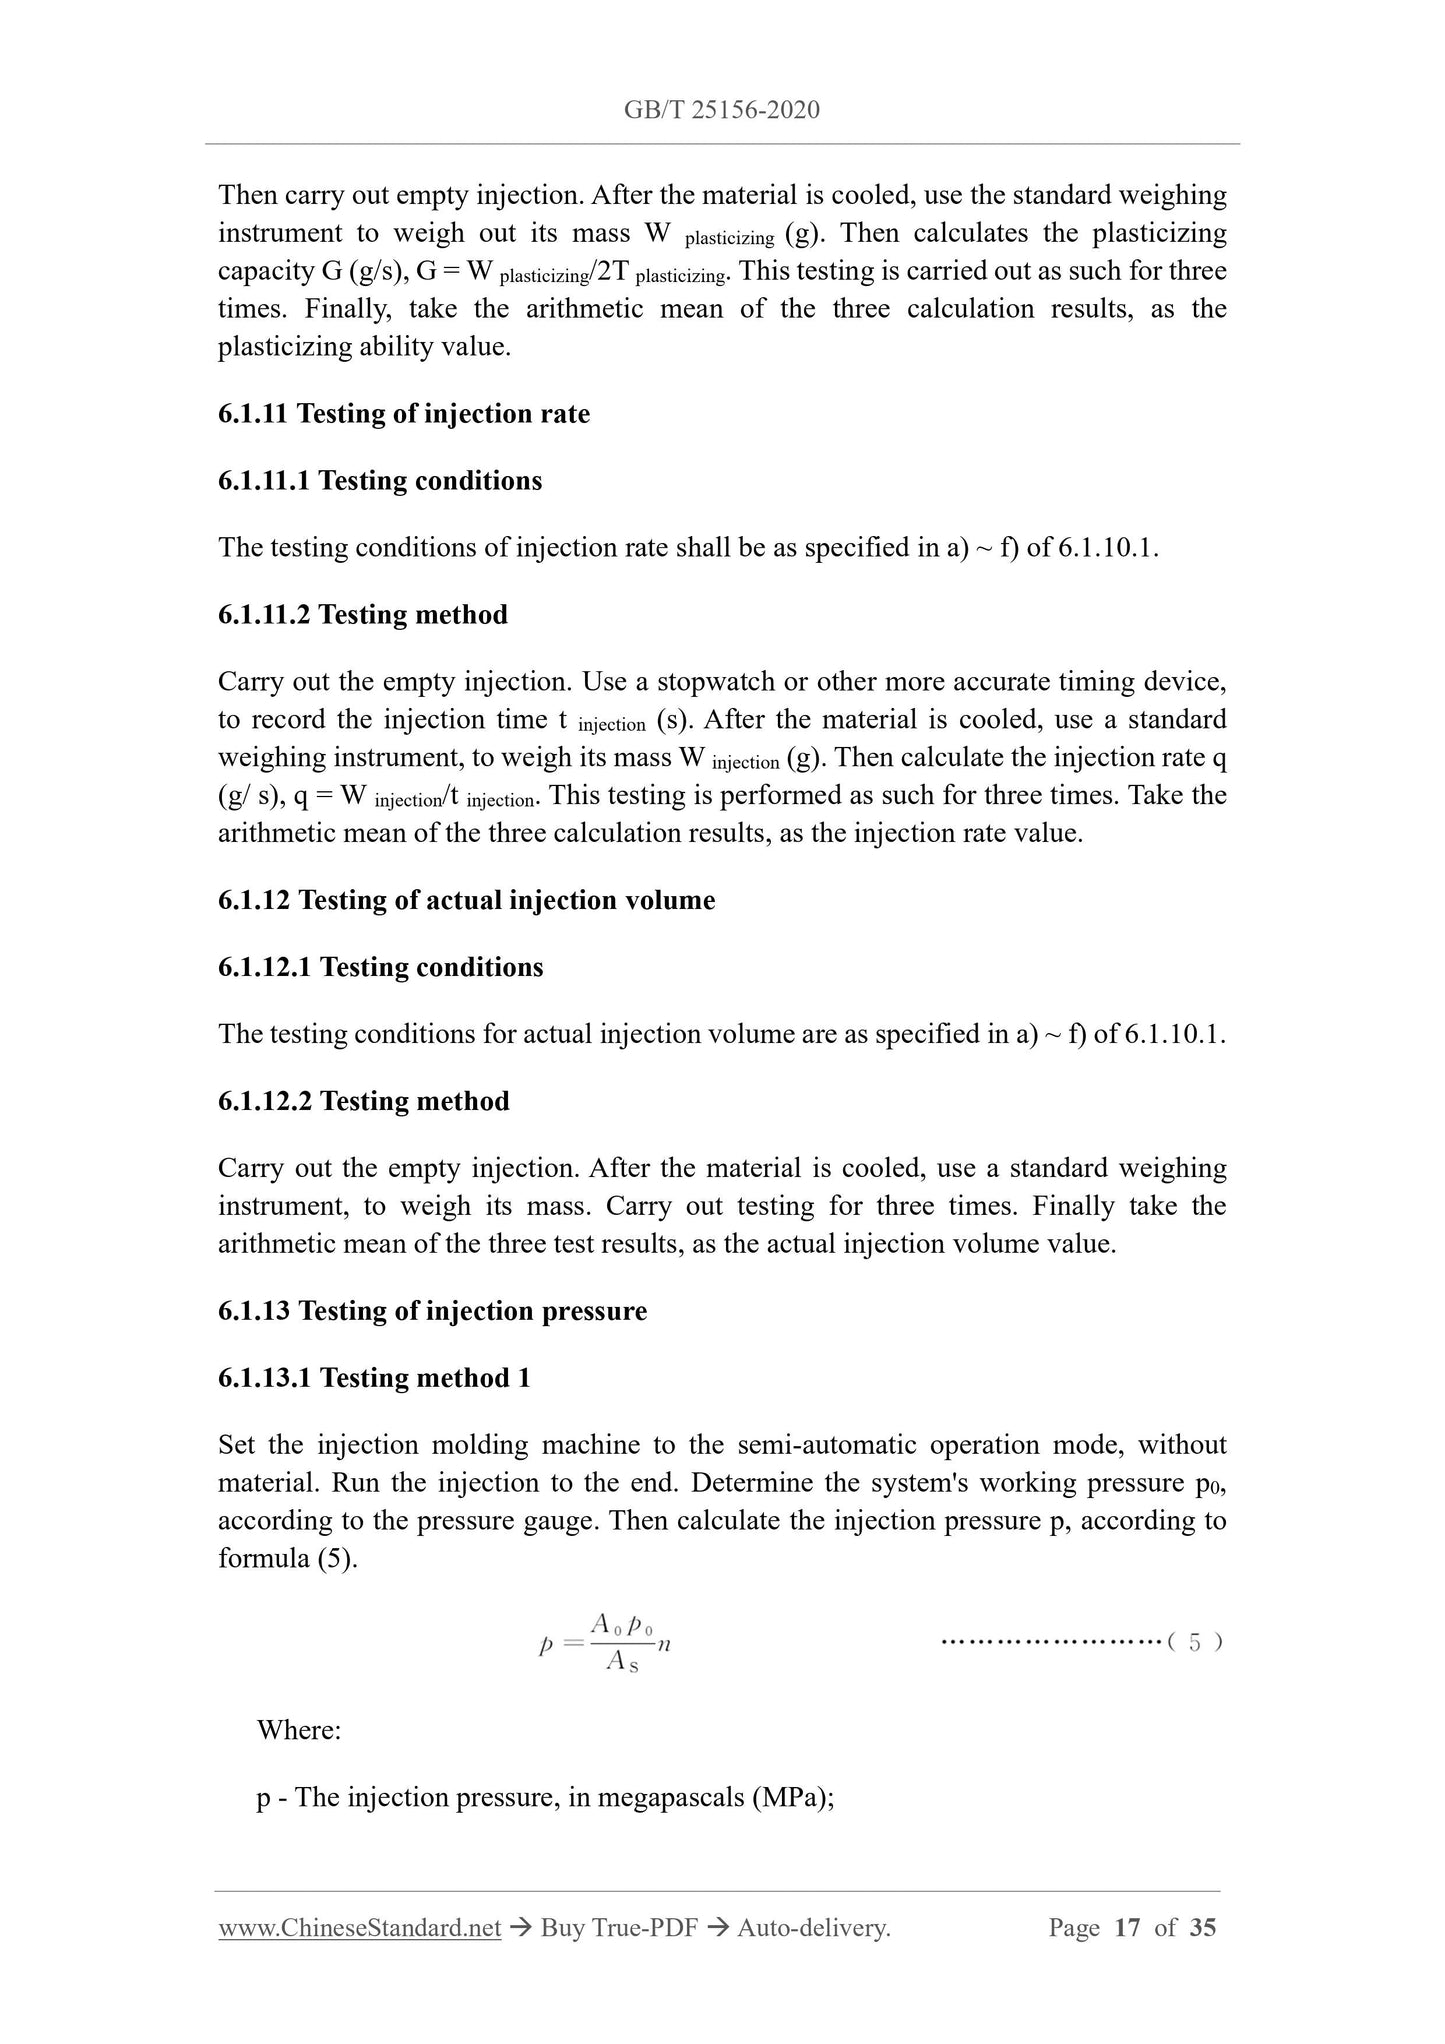 GB/T 25156-2020 Page 6